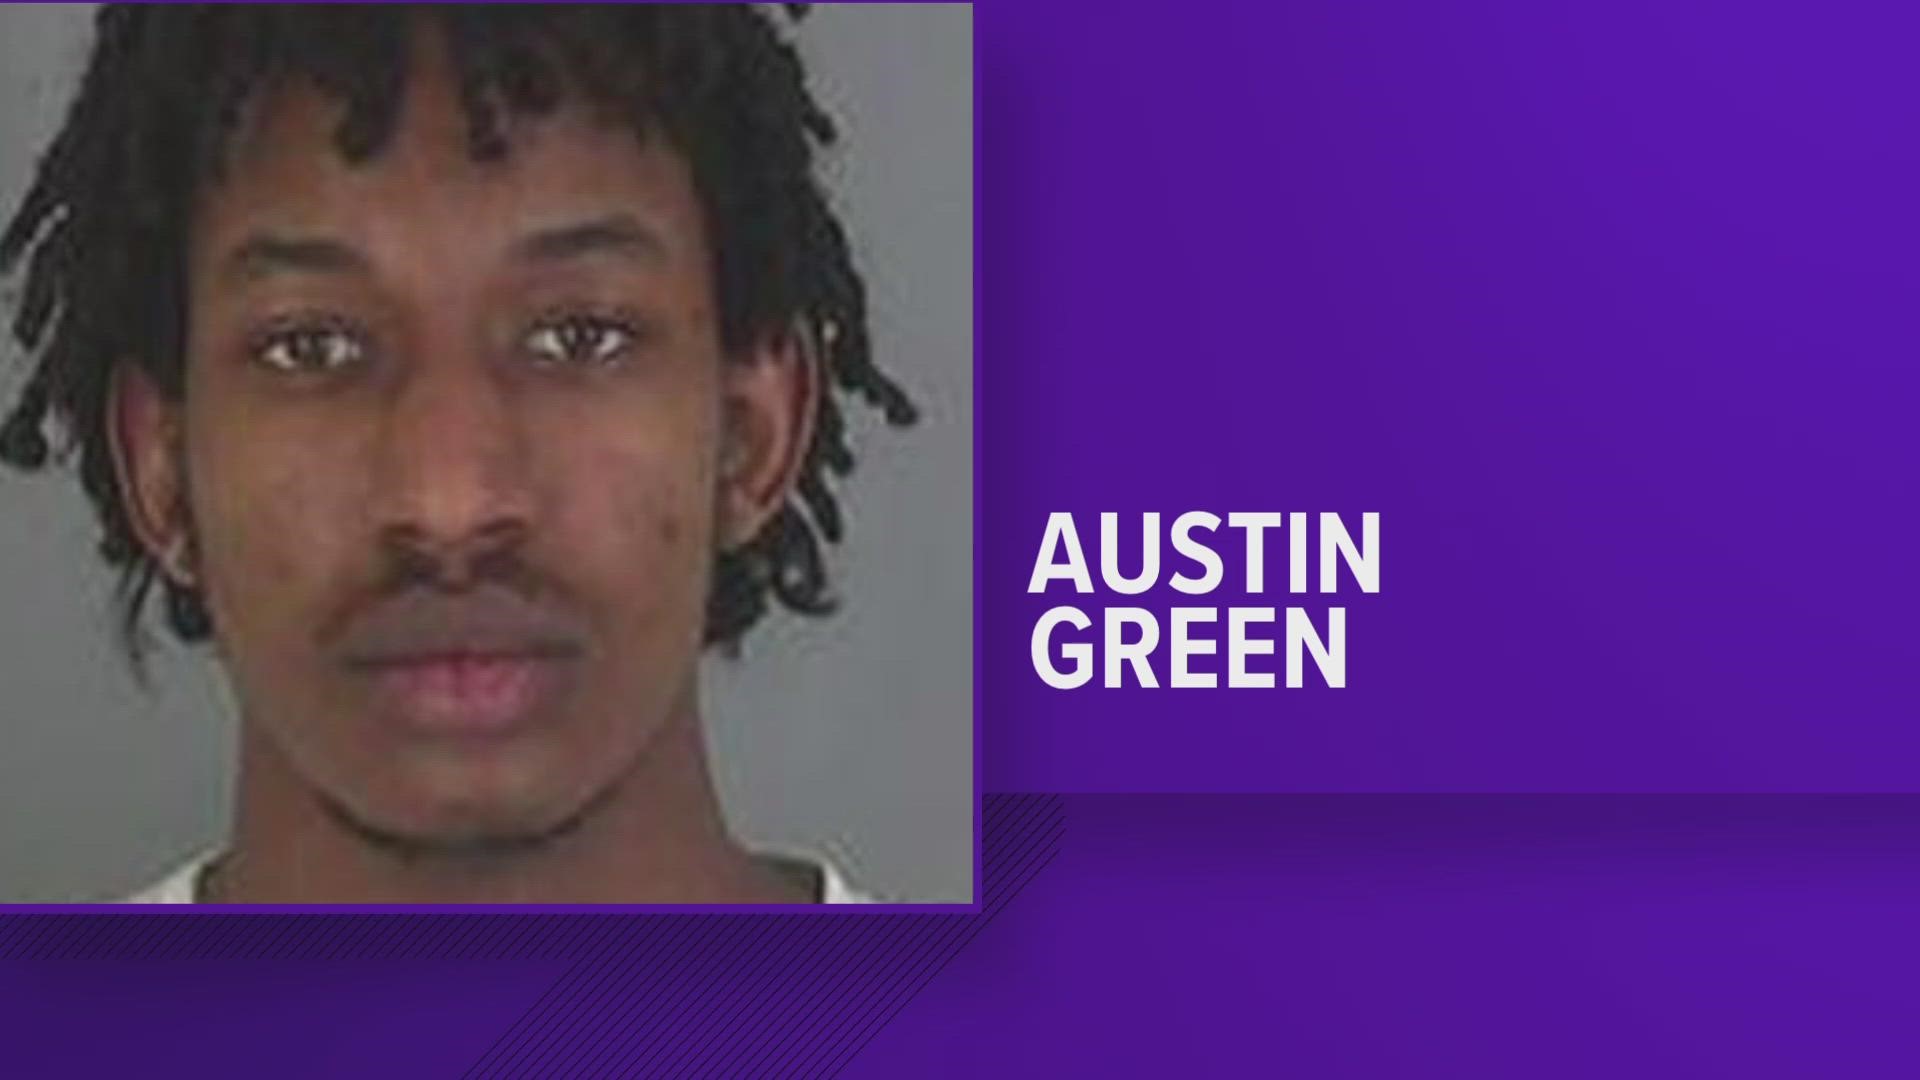 A jury convicted Austin Green of the shooting that killed D'Londre Calmes.